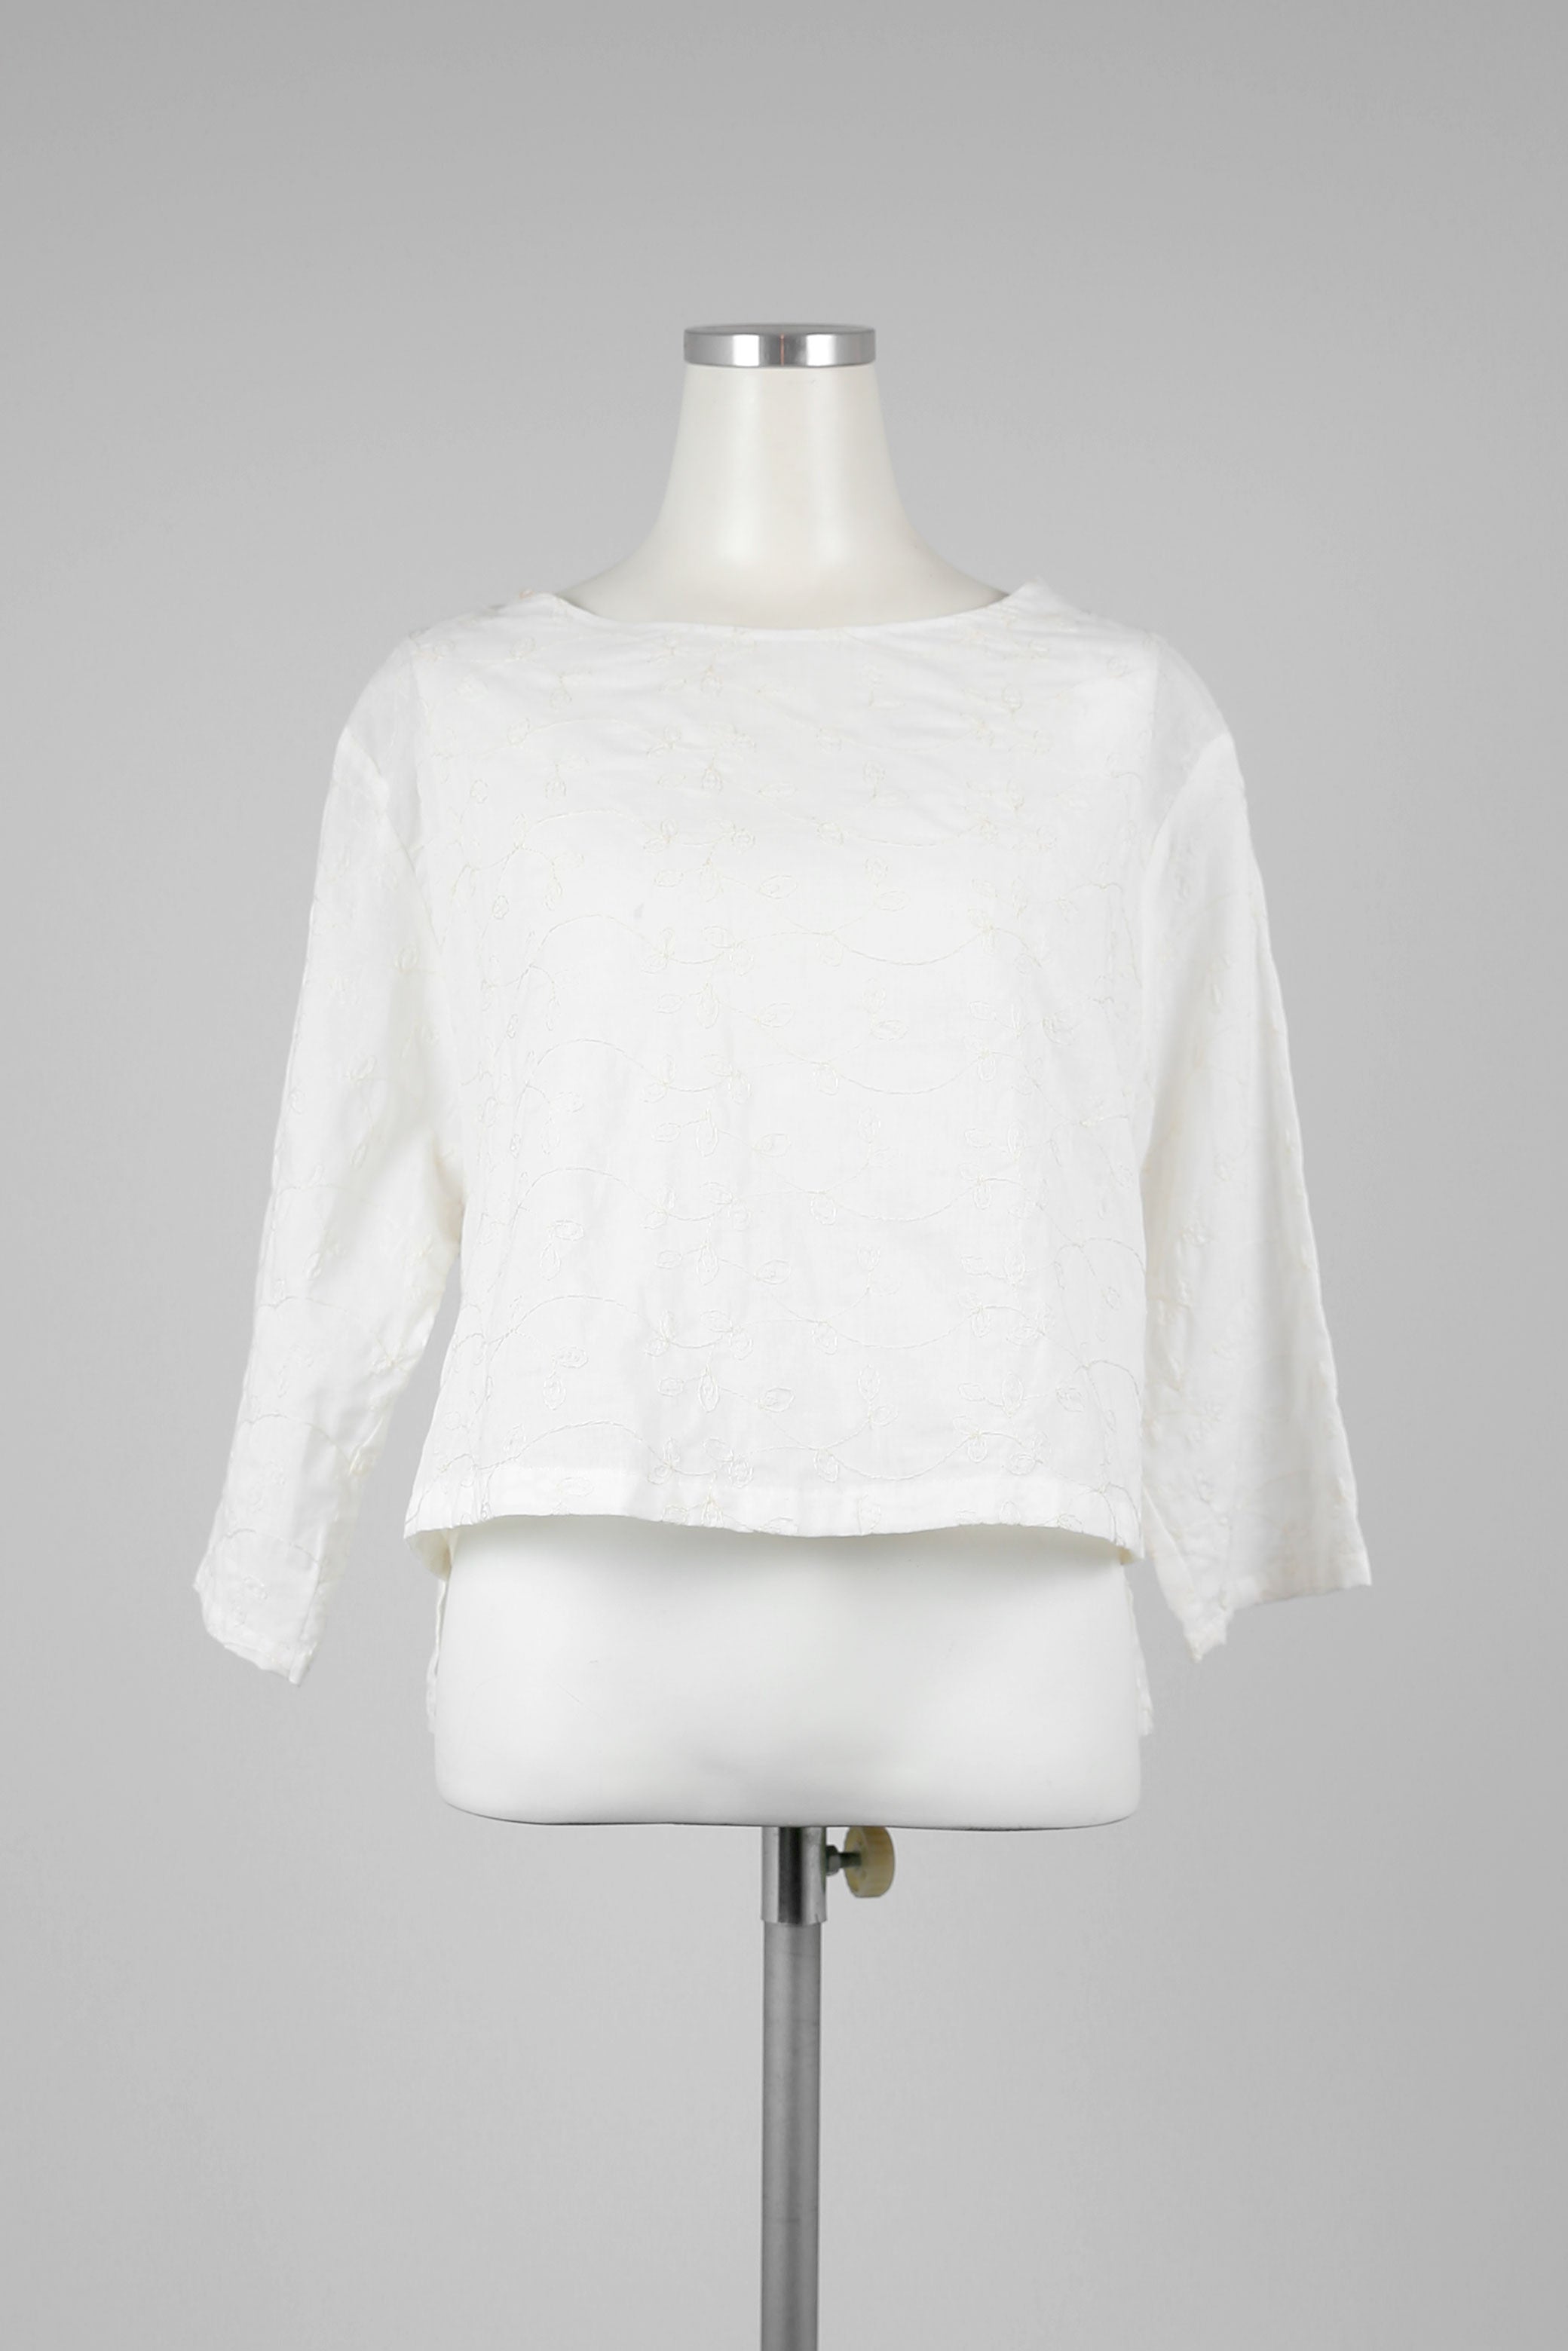 White Embroidered Summer Cotton Top - Tae With Jane NY